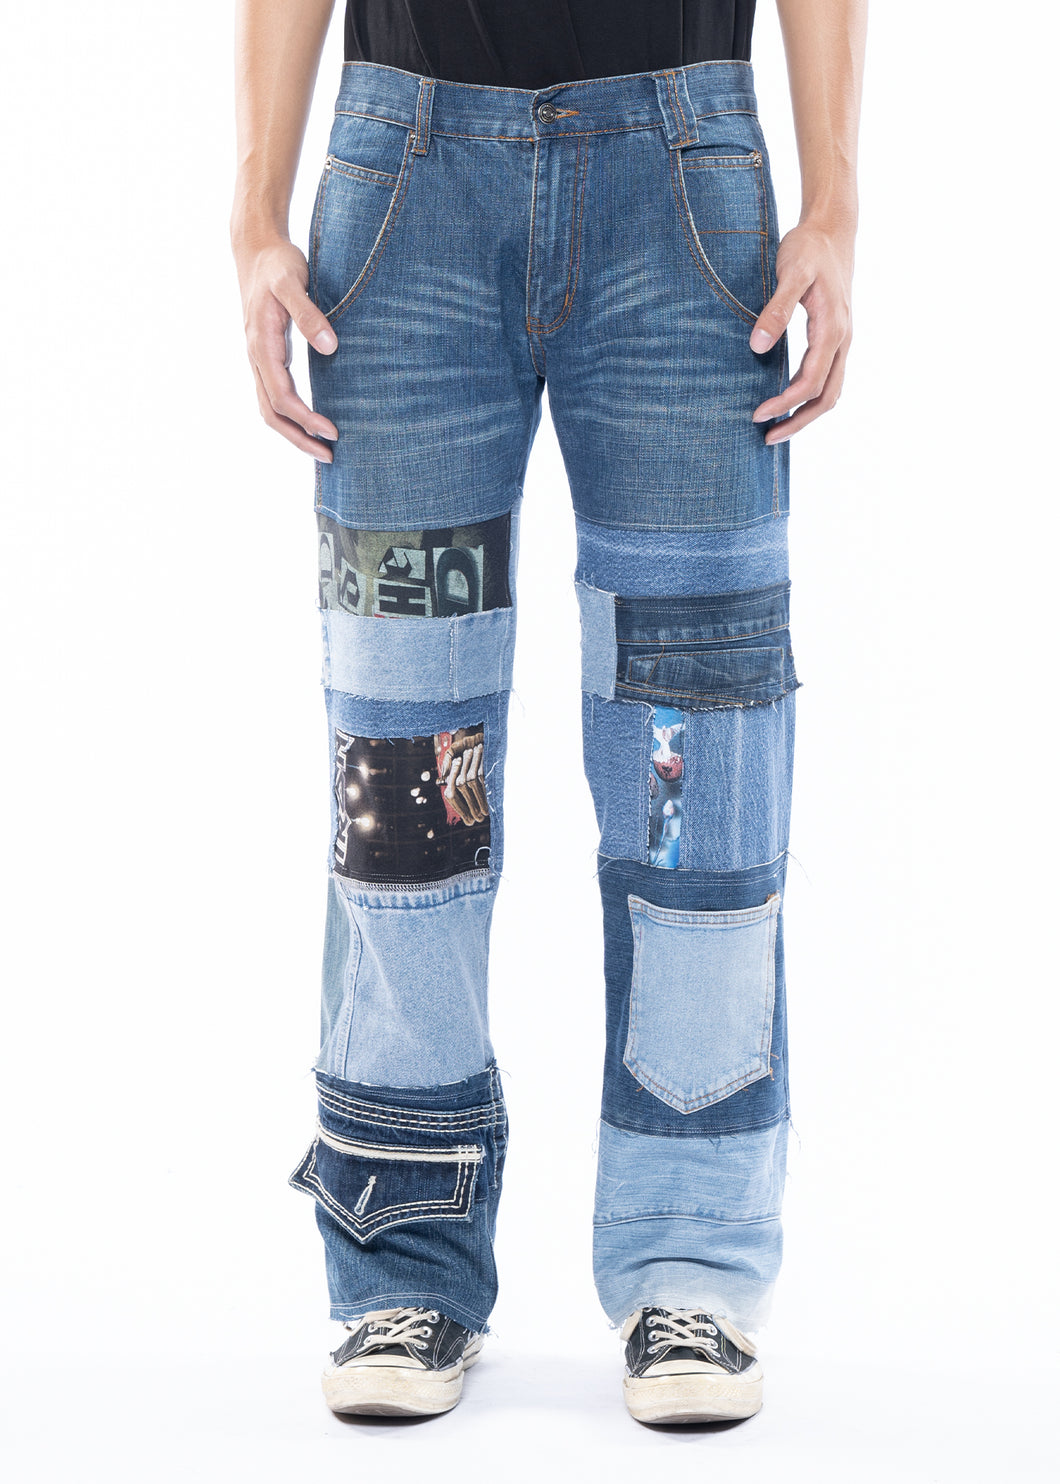 RANDOMEFFECT Straight Patched Jeans